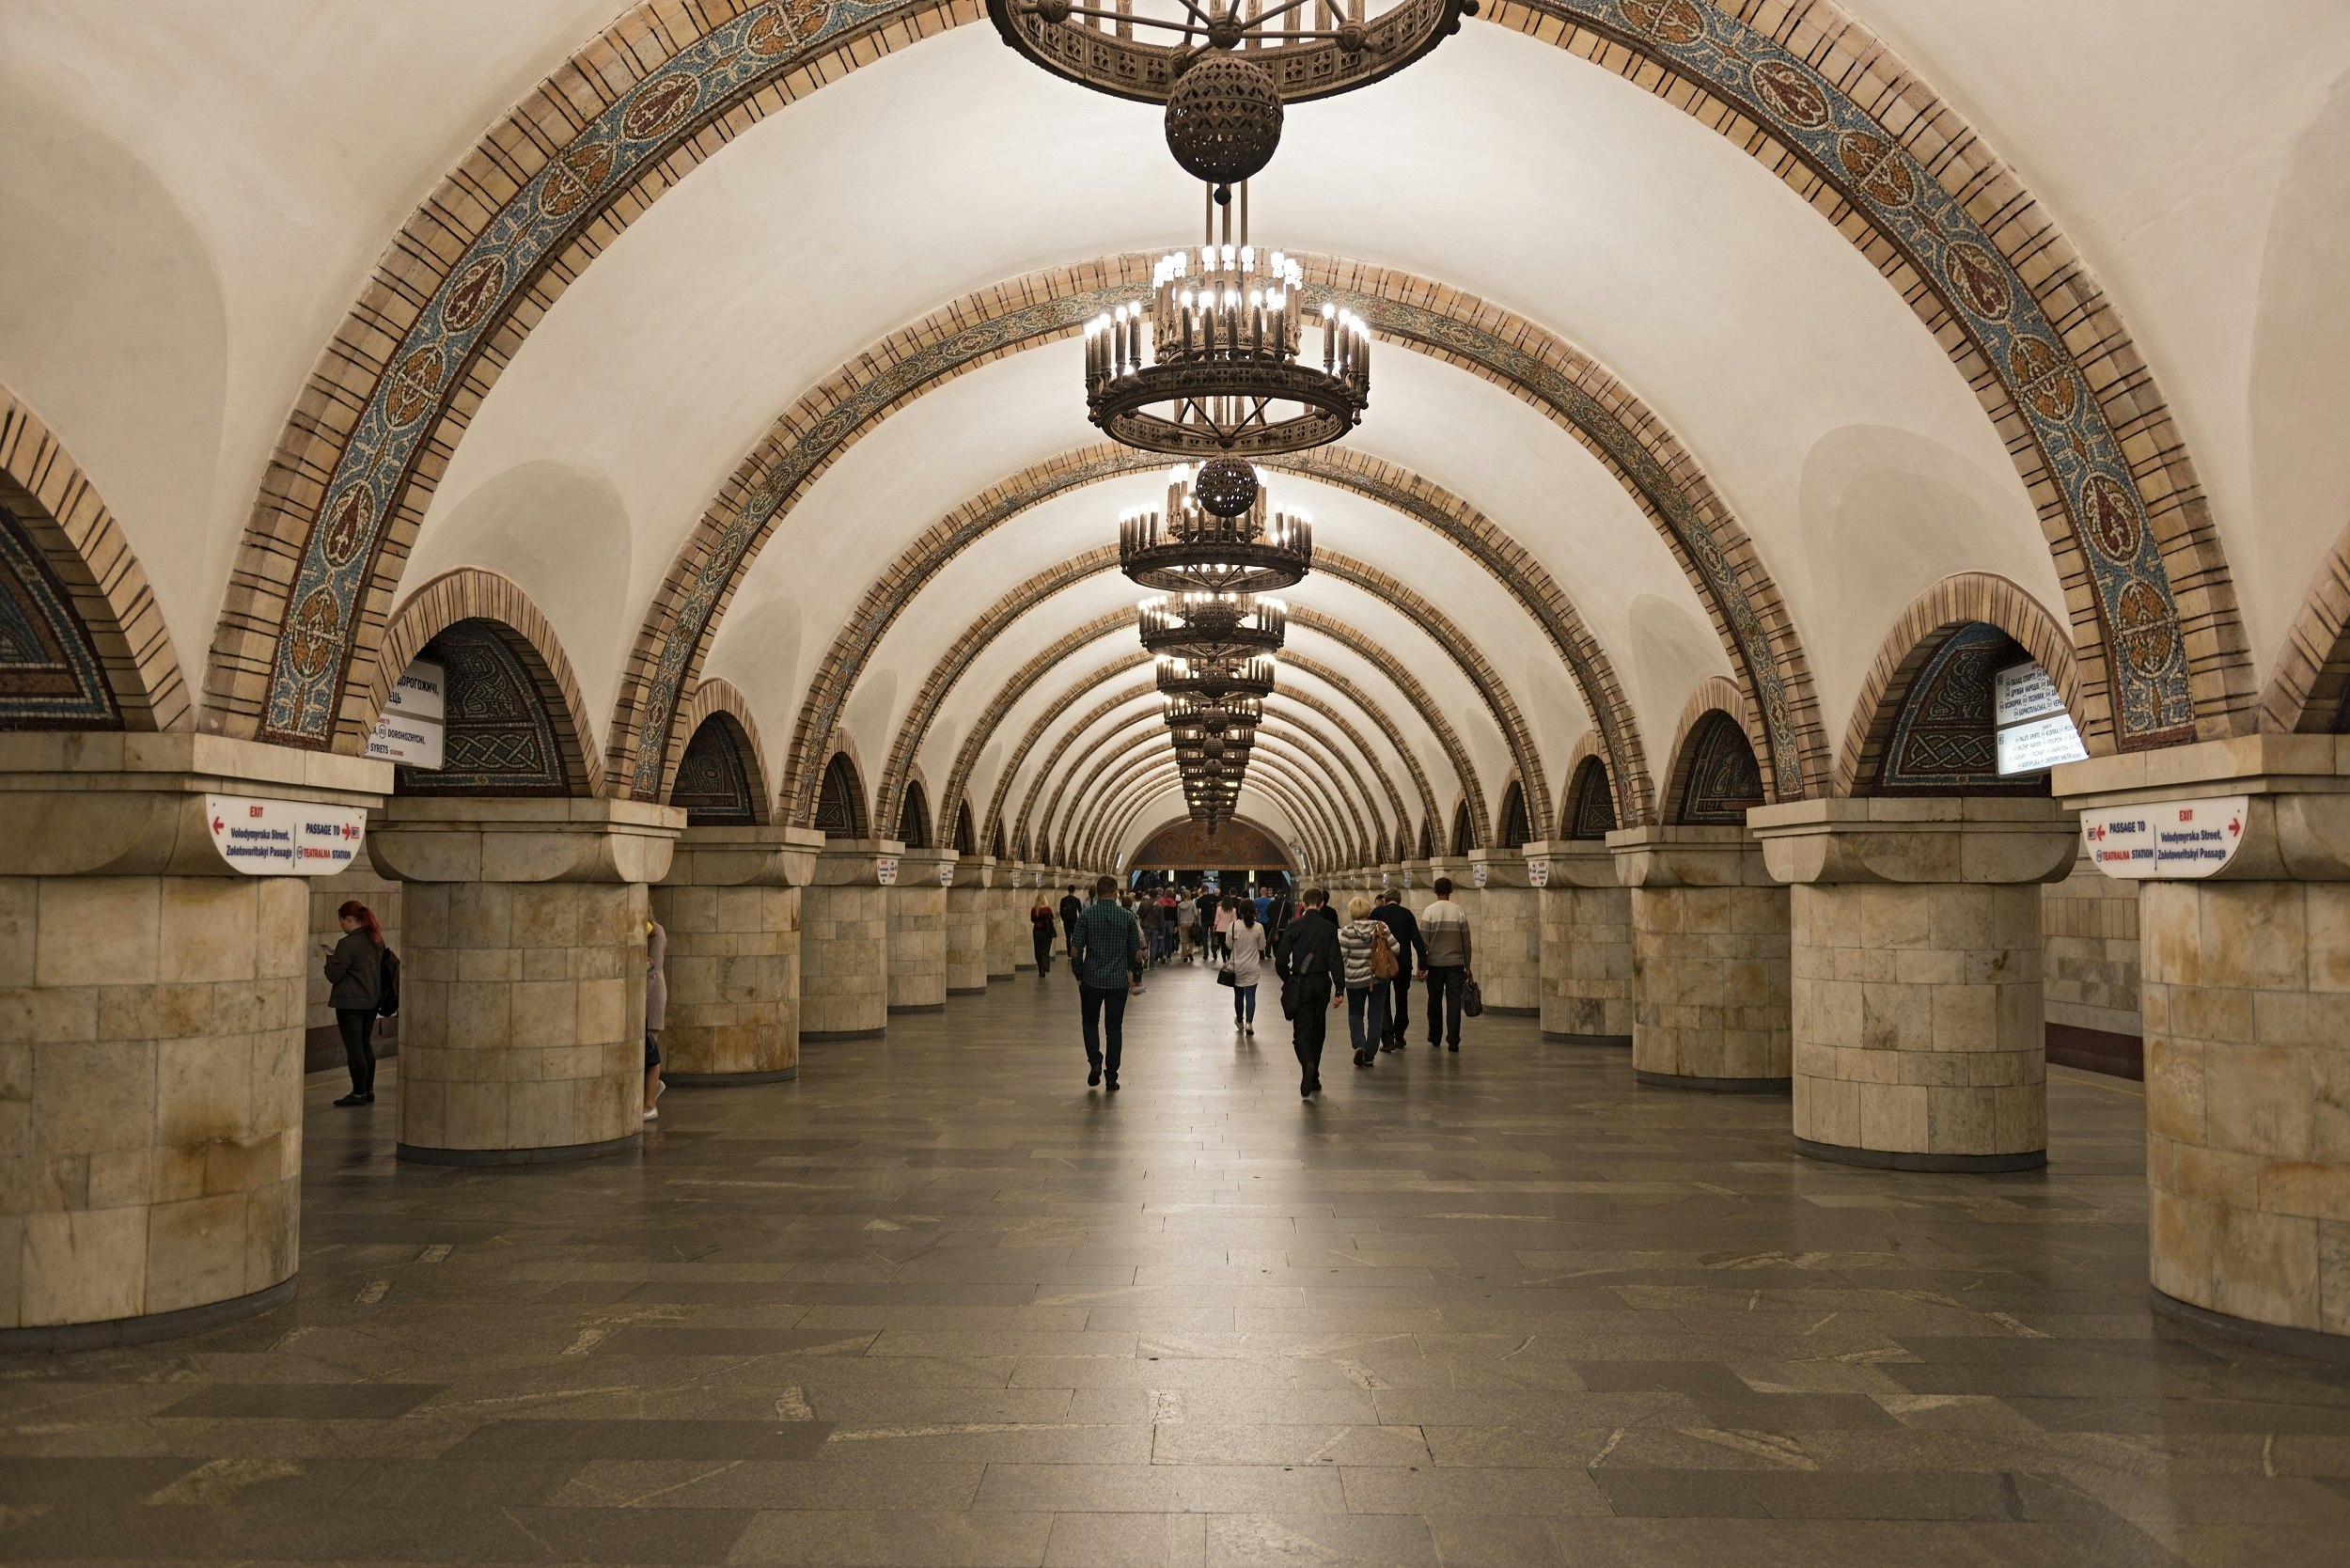 A long wide corridor with a vaulted ceiling and ornate chandeliers hanging down in Aresnalna, Kiev